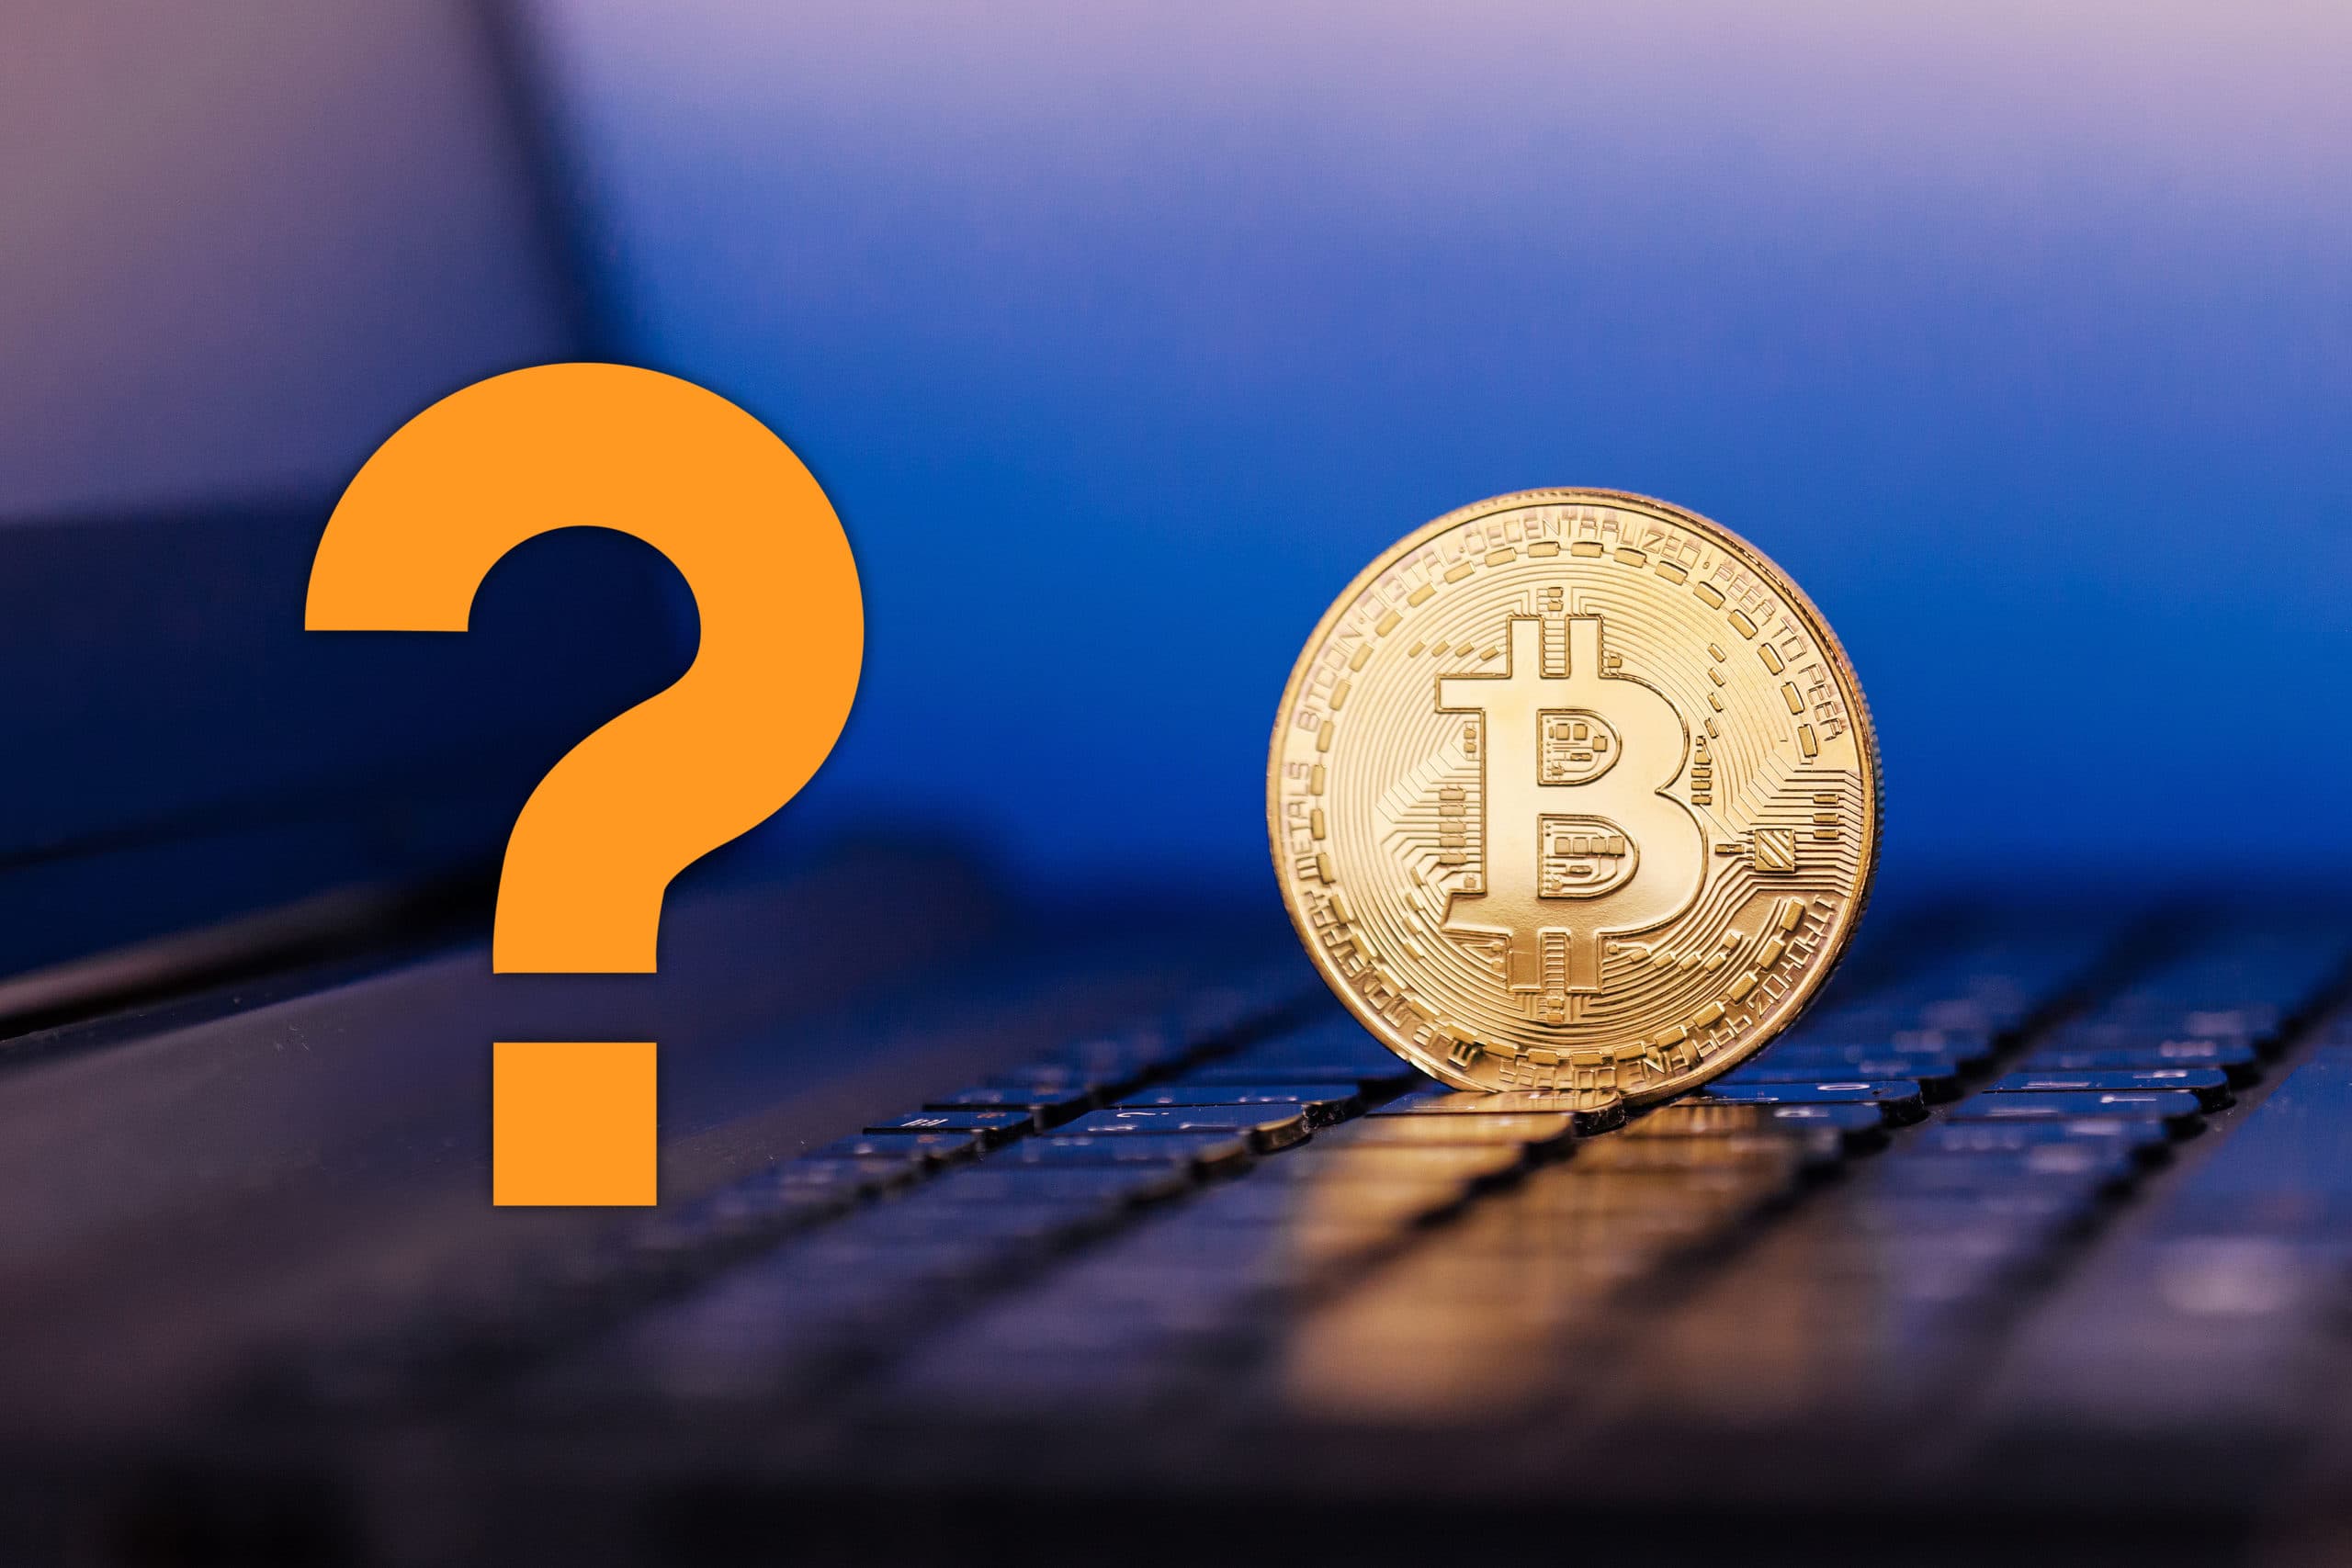 How long will the fall of cryptocurrencies last and what value will bitcoin have at the end of the year?